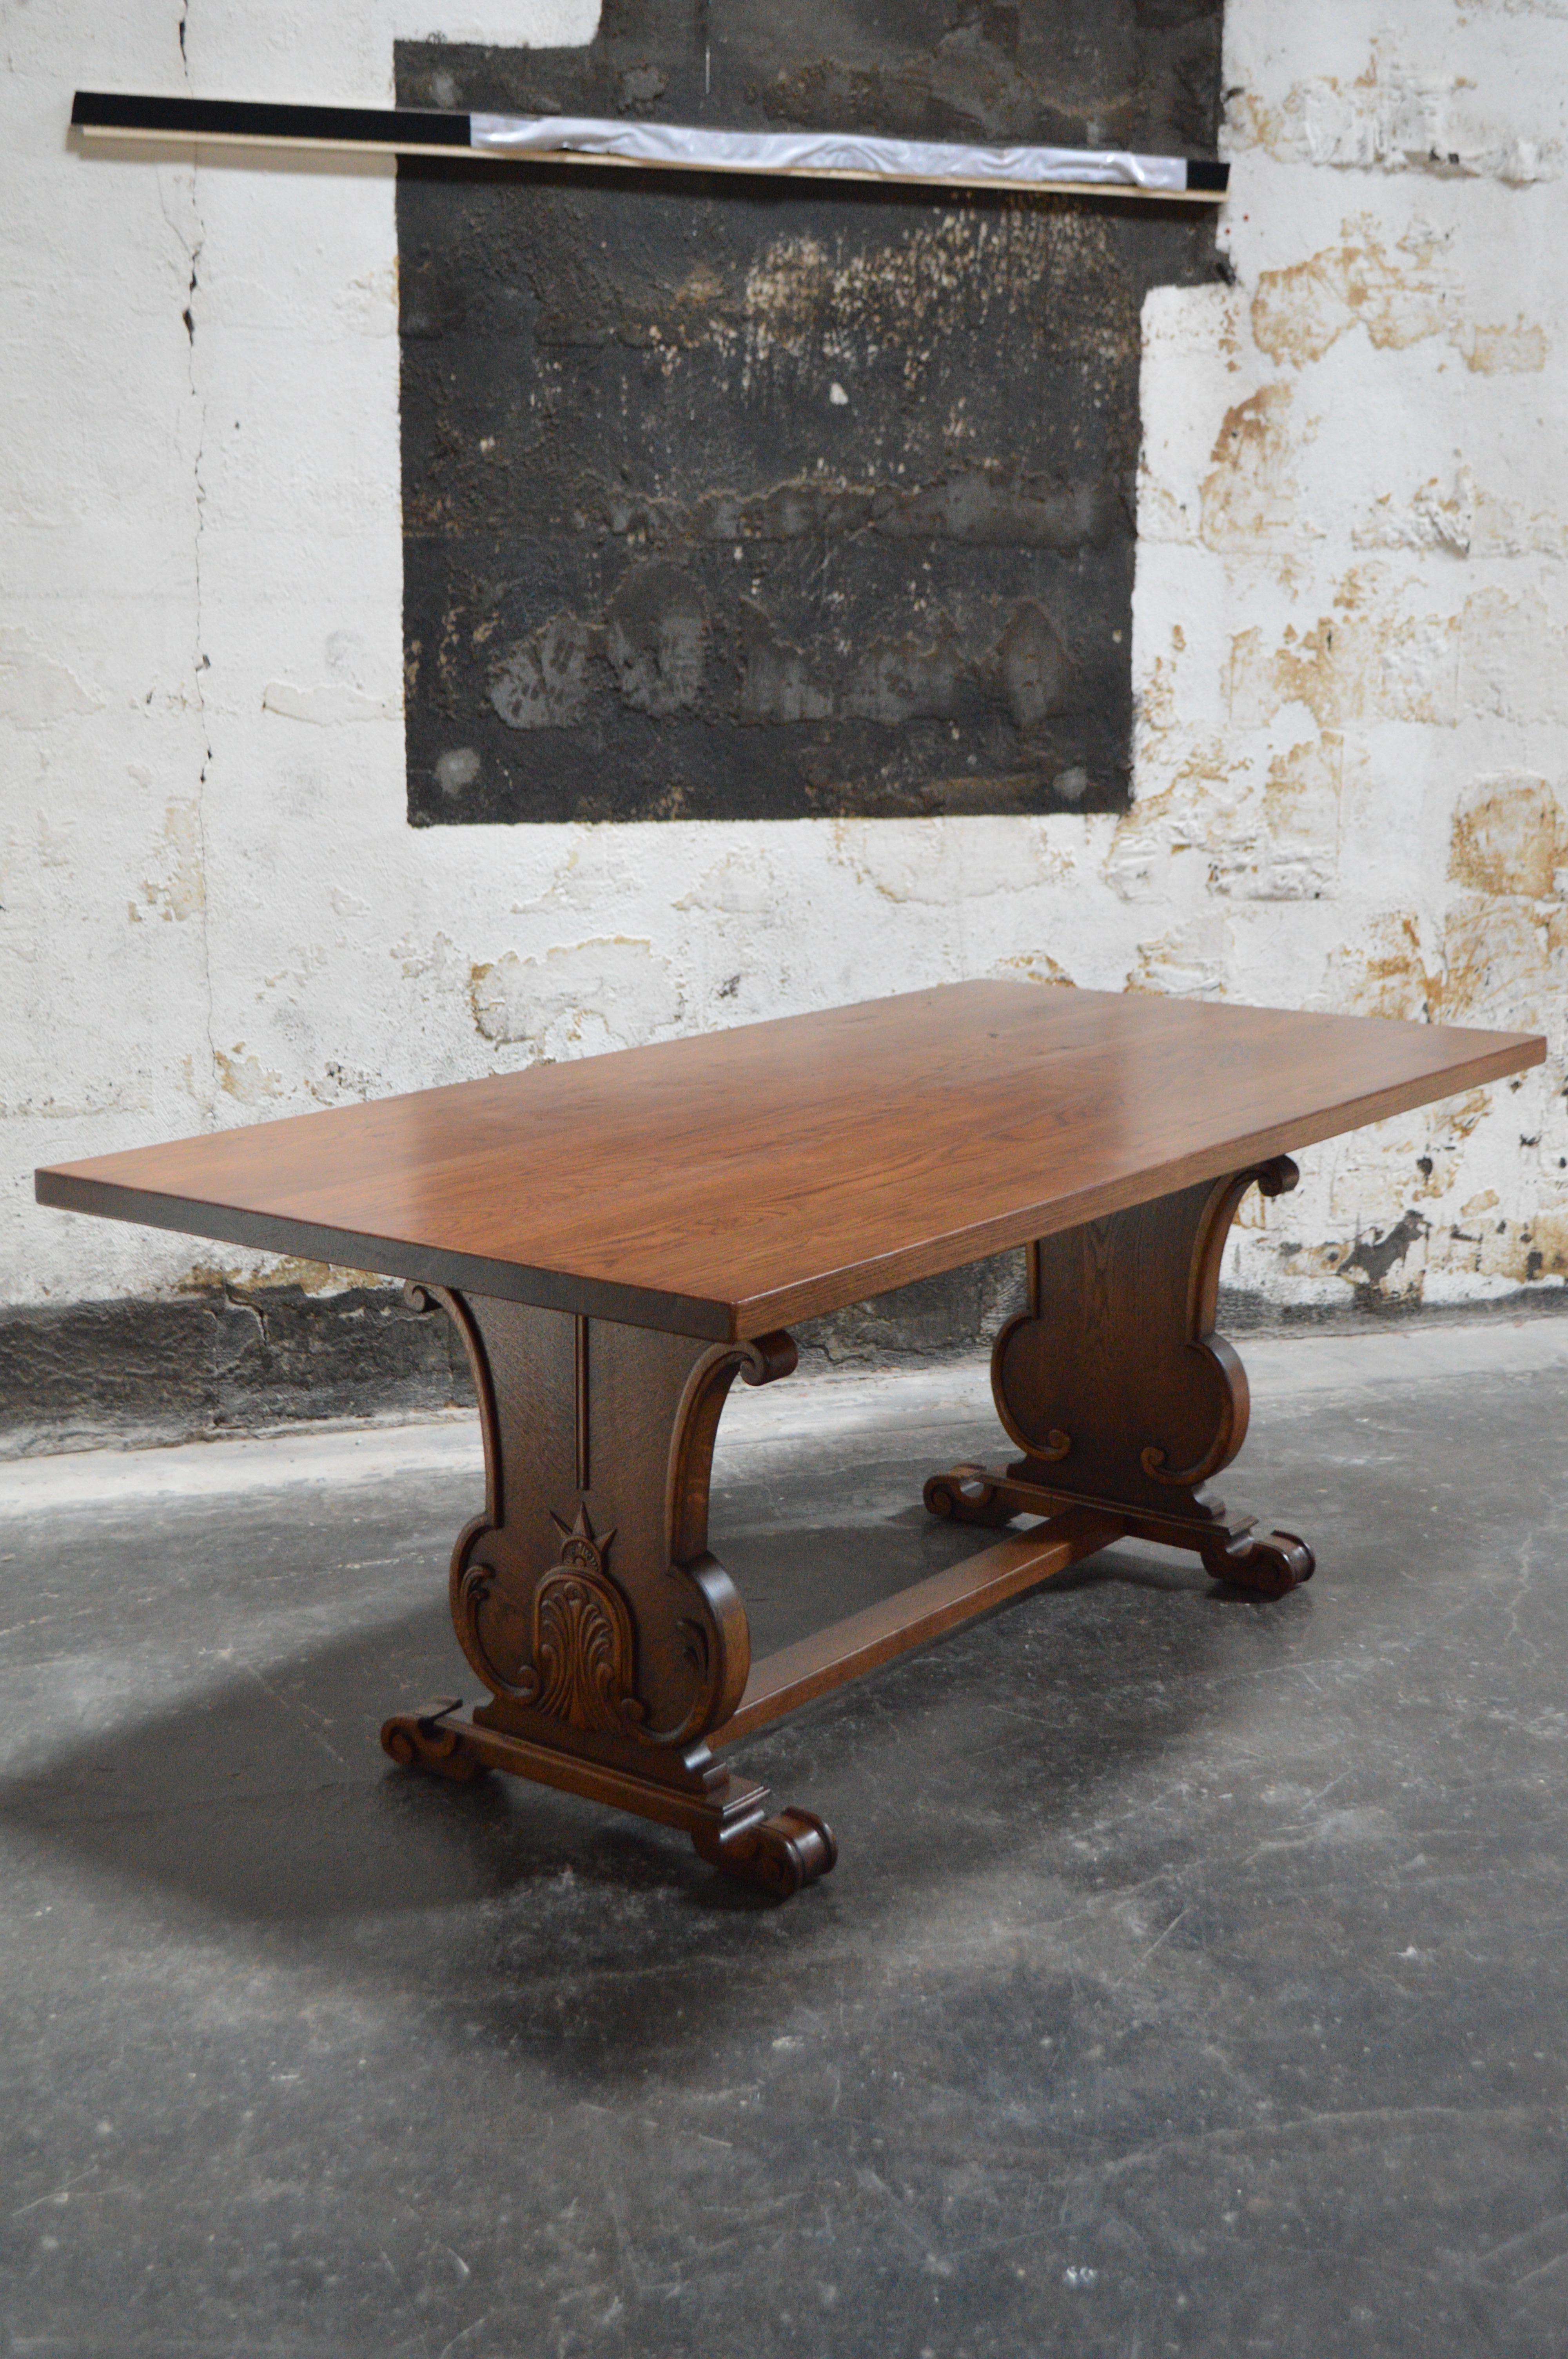 This style of trestle dining table is referred to in Sweden as a 